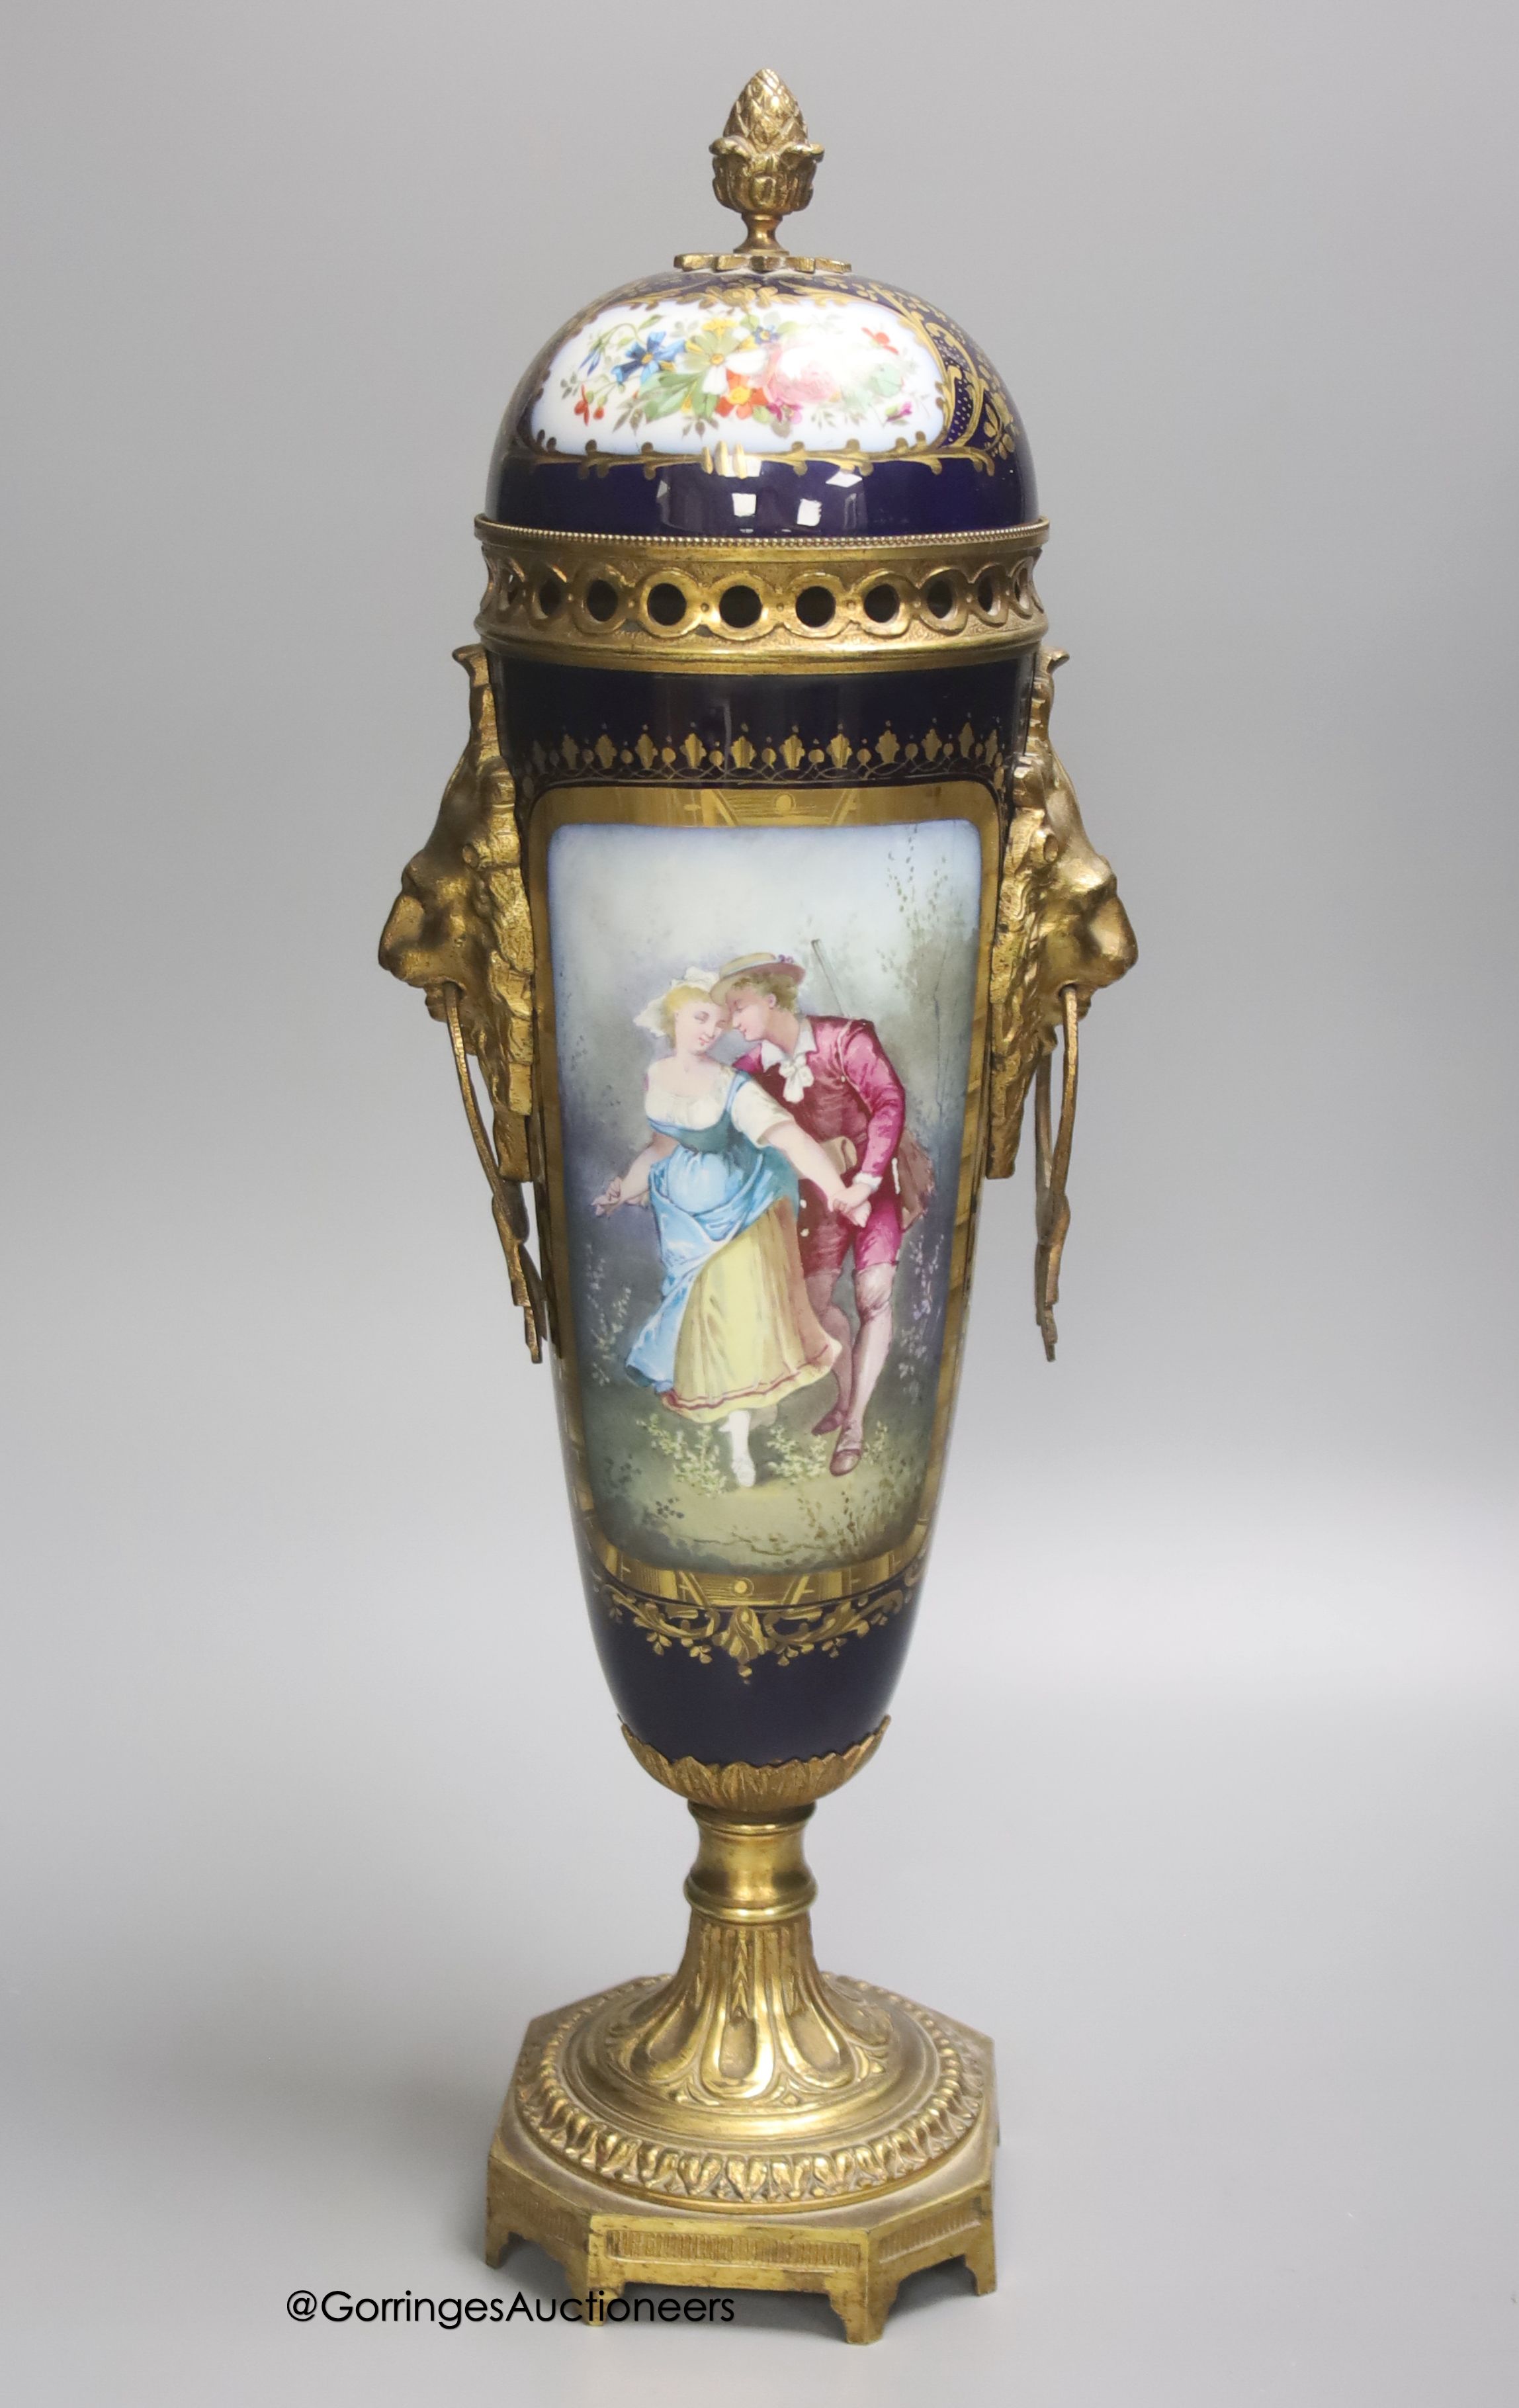 A 19th century Sevres style ormolu mounted porcelain jar and cover, 46cm